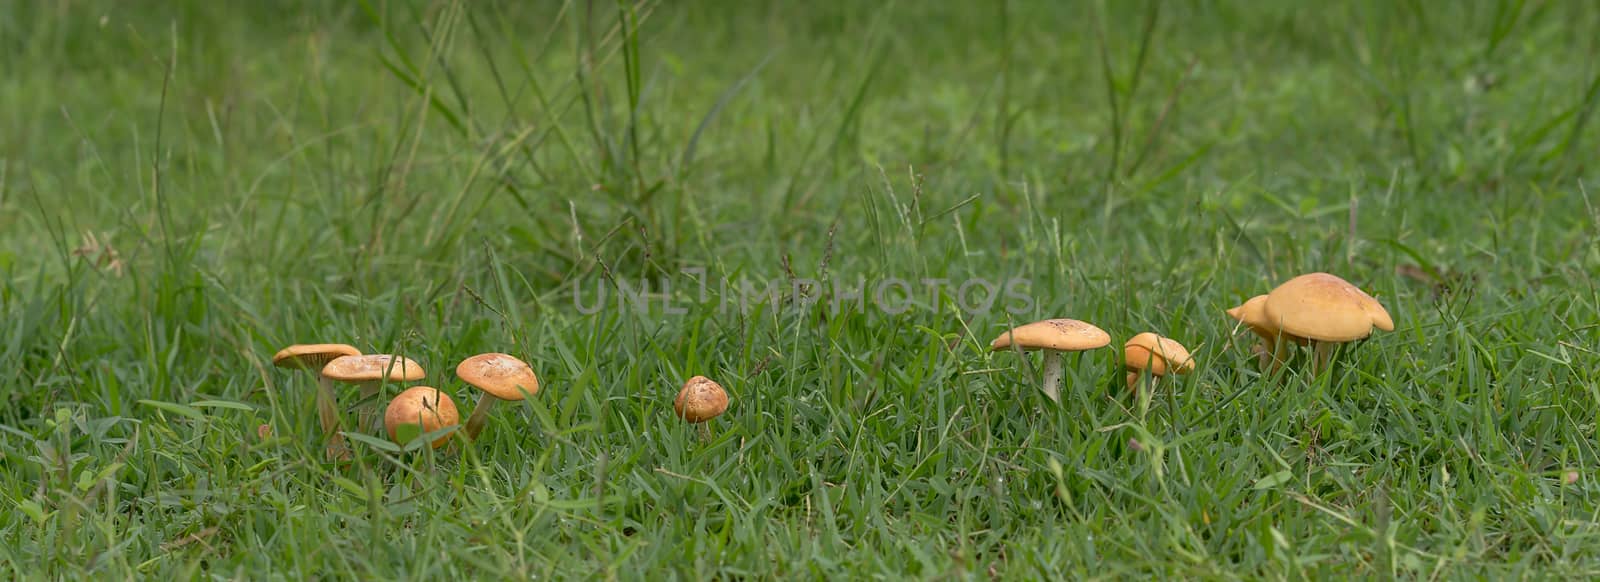 Live mushrooms growing in green grass panorama view 